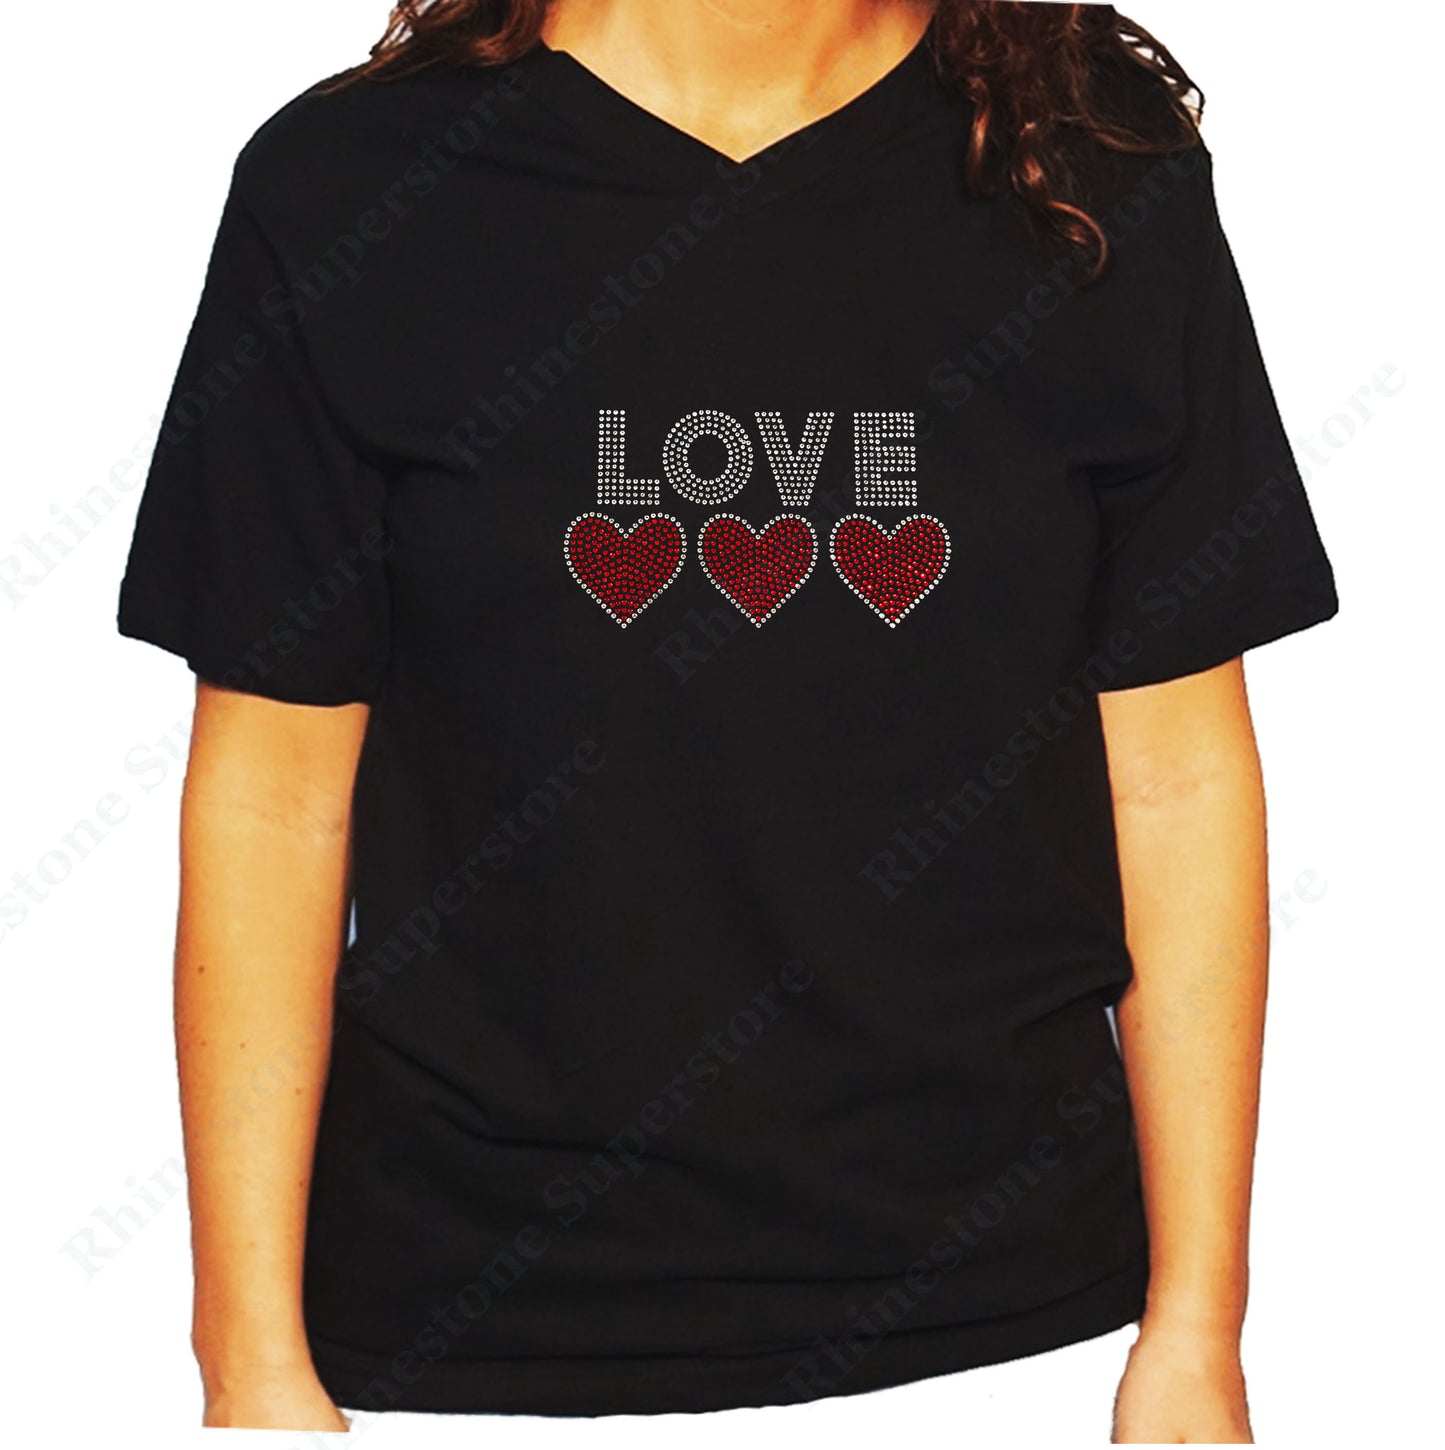 Women's / Unisex T-Shirt with Love with 3 Hearts in Rhinestones